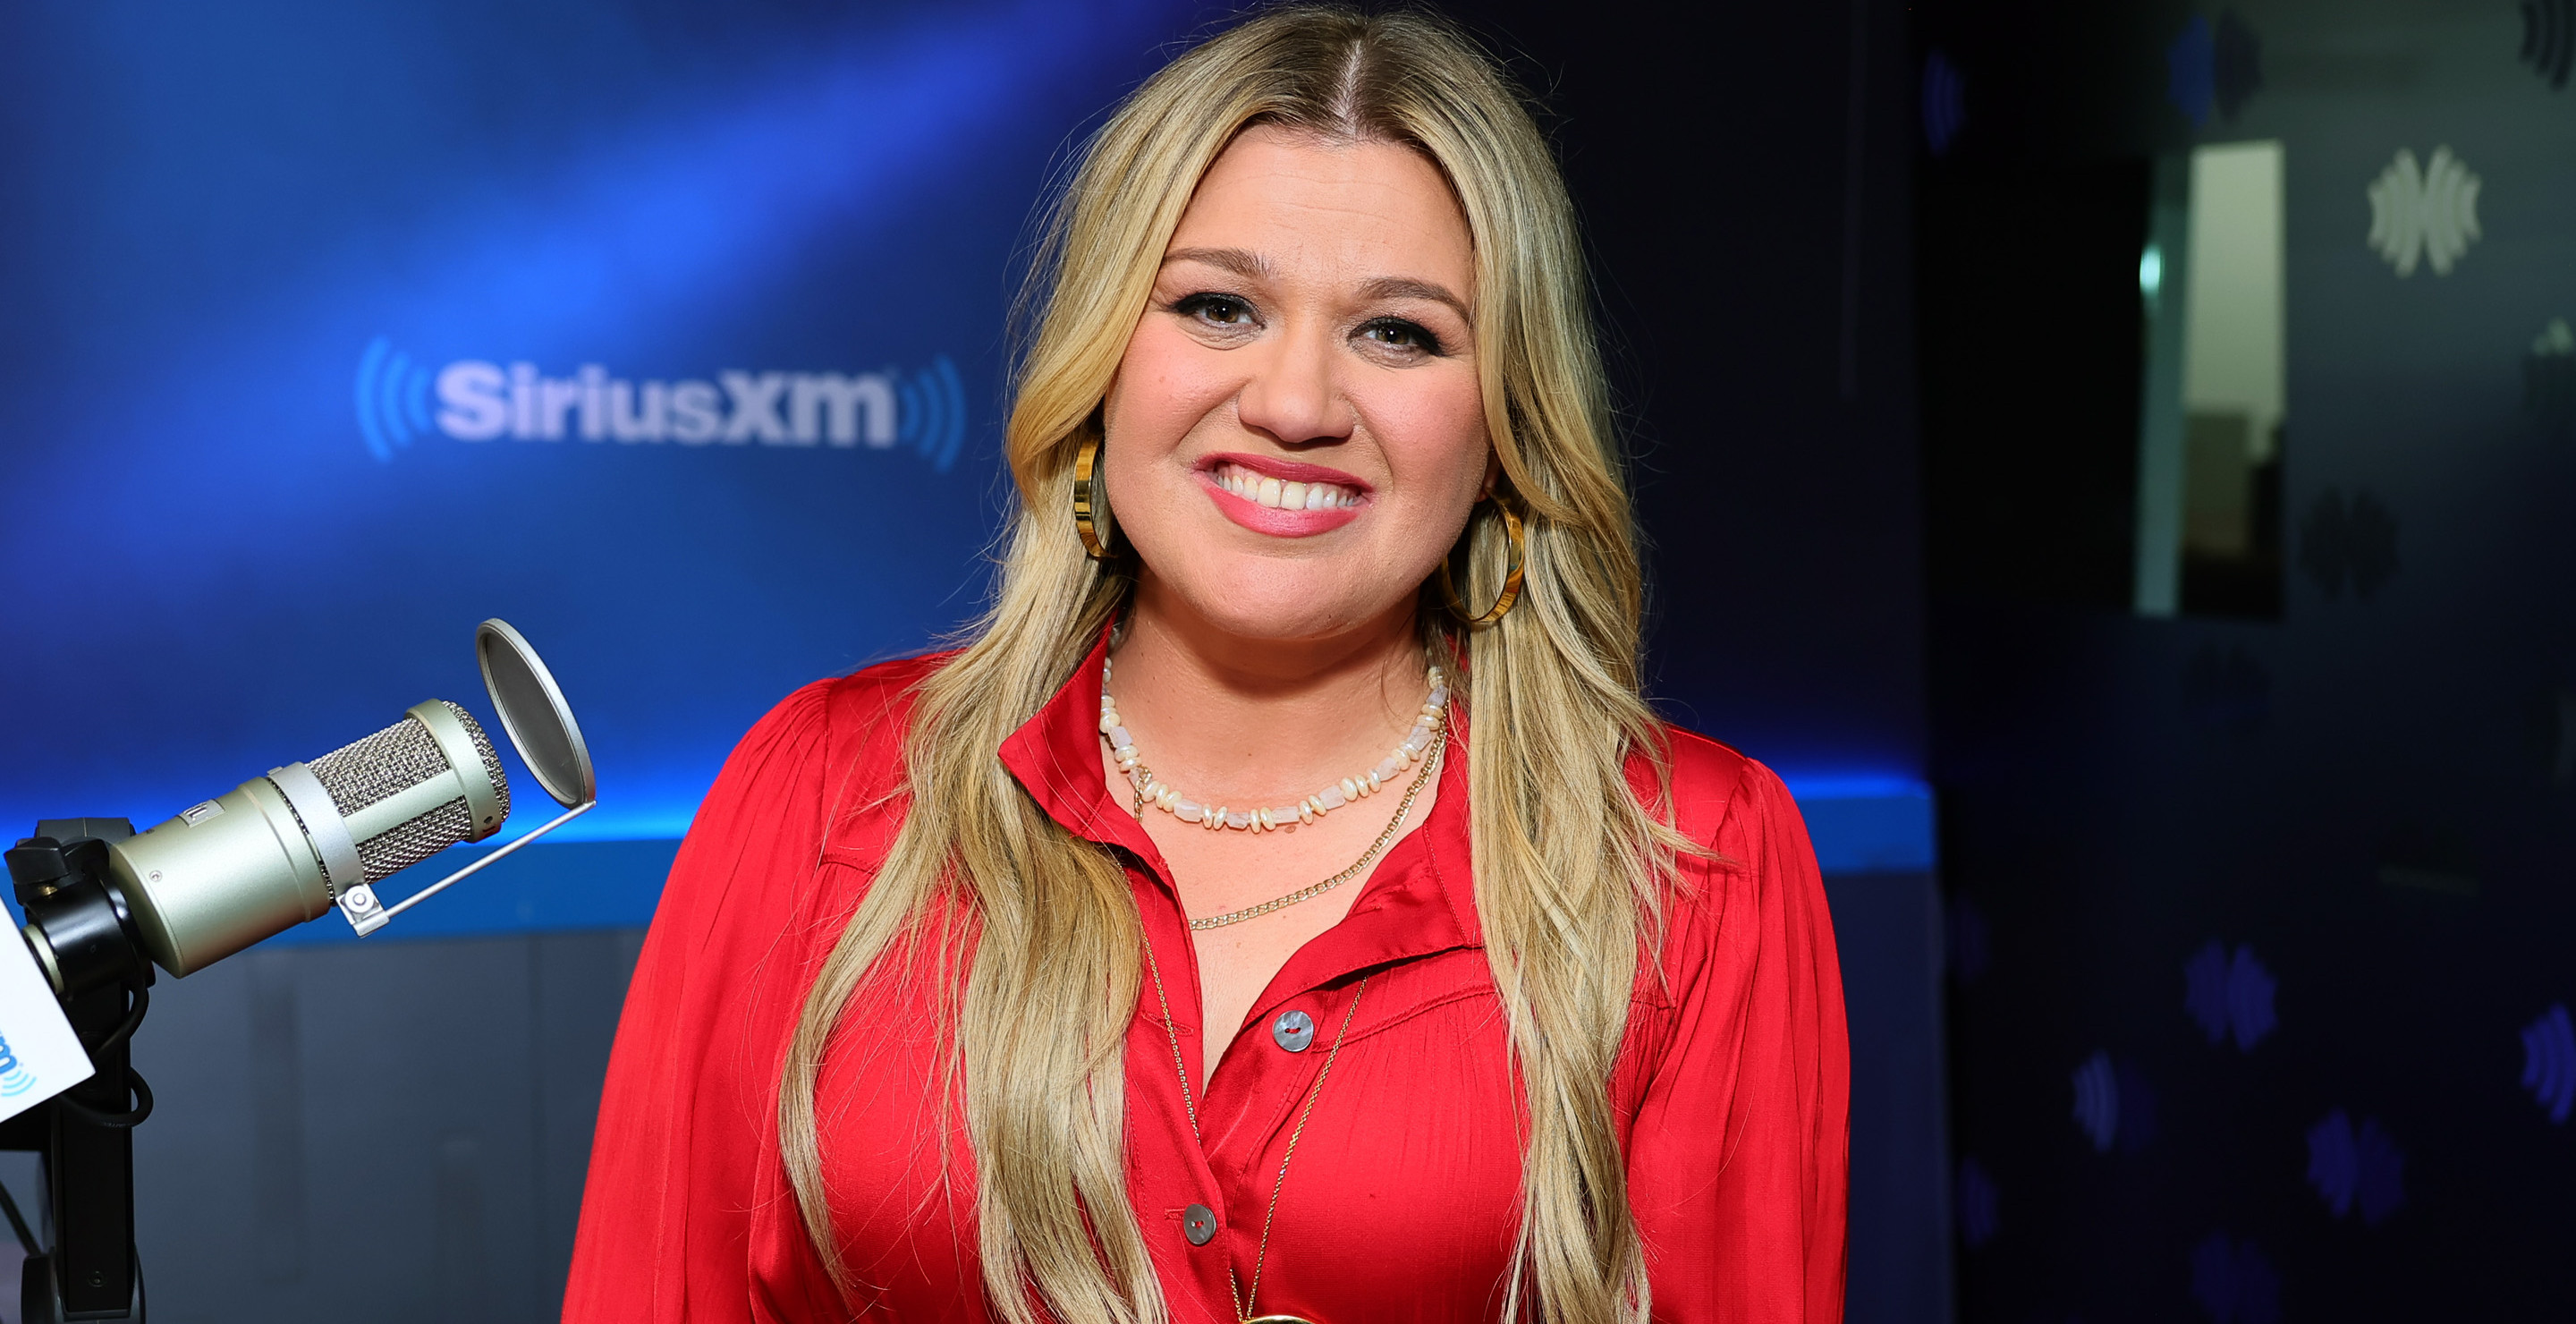 Kelly Clarkson Details Scary Pregnancy Experience As Singer Condemns Arizona's Abortion Law